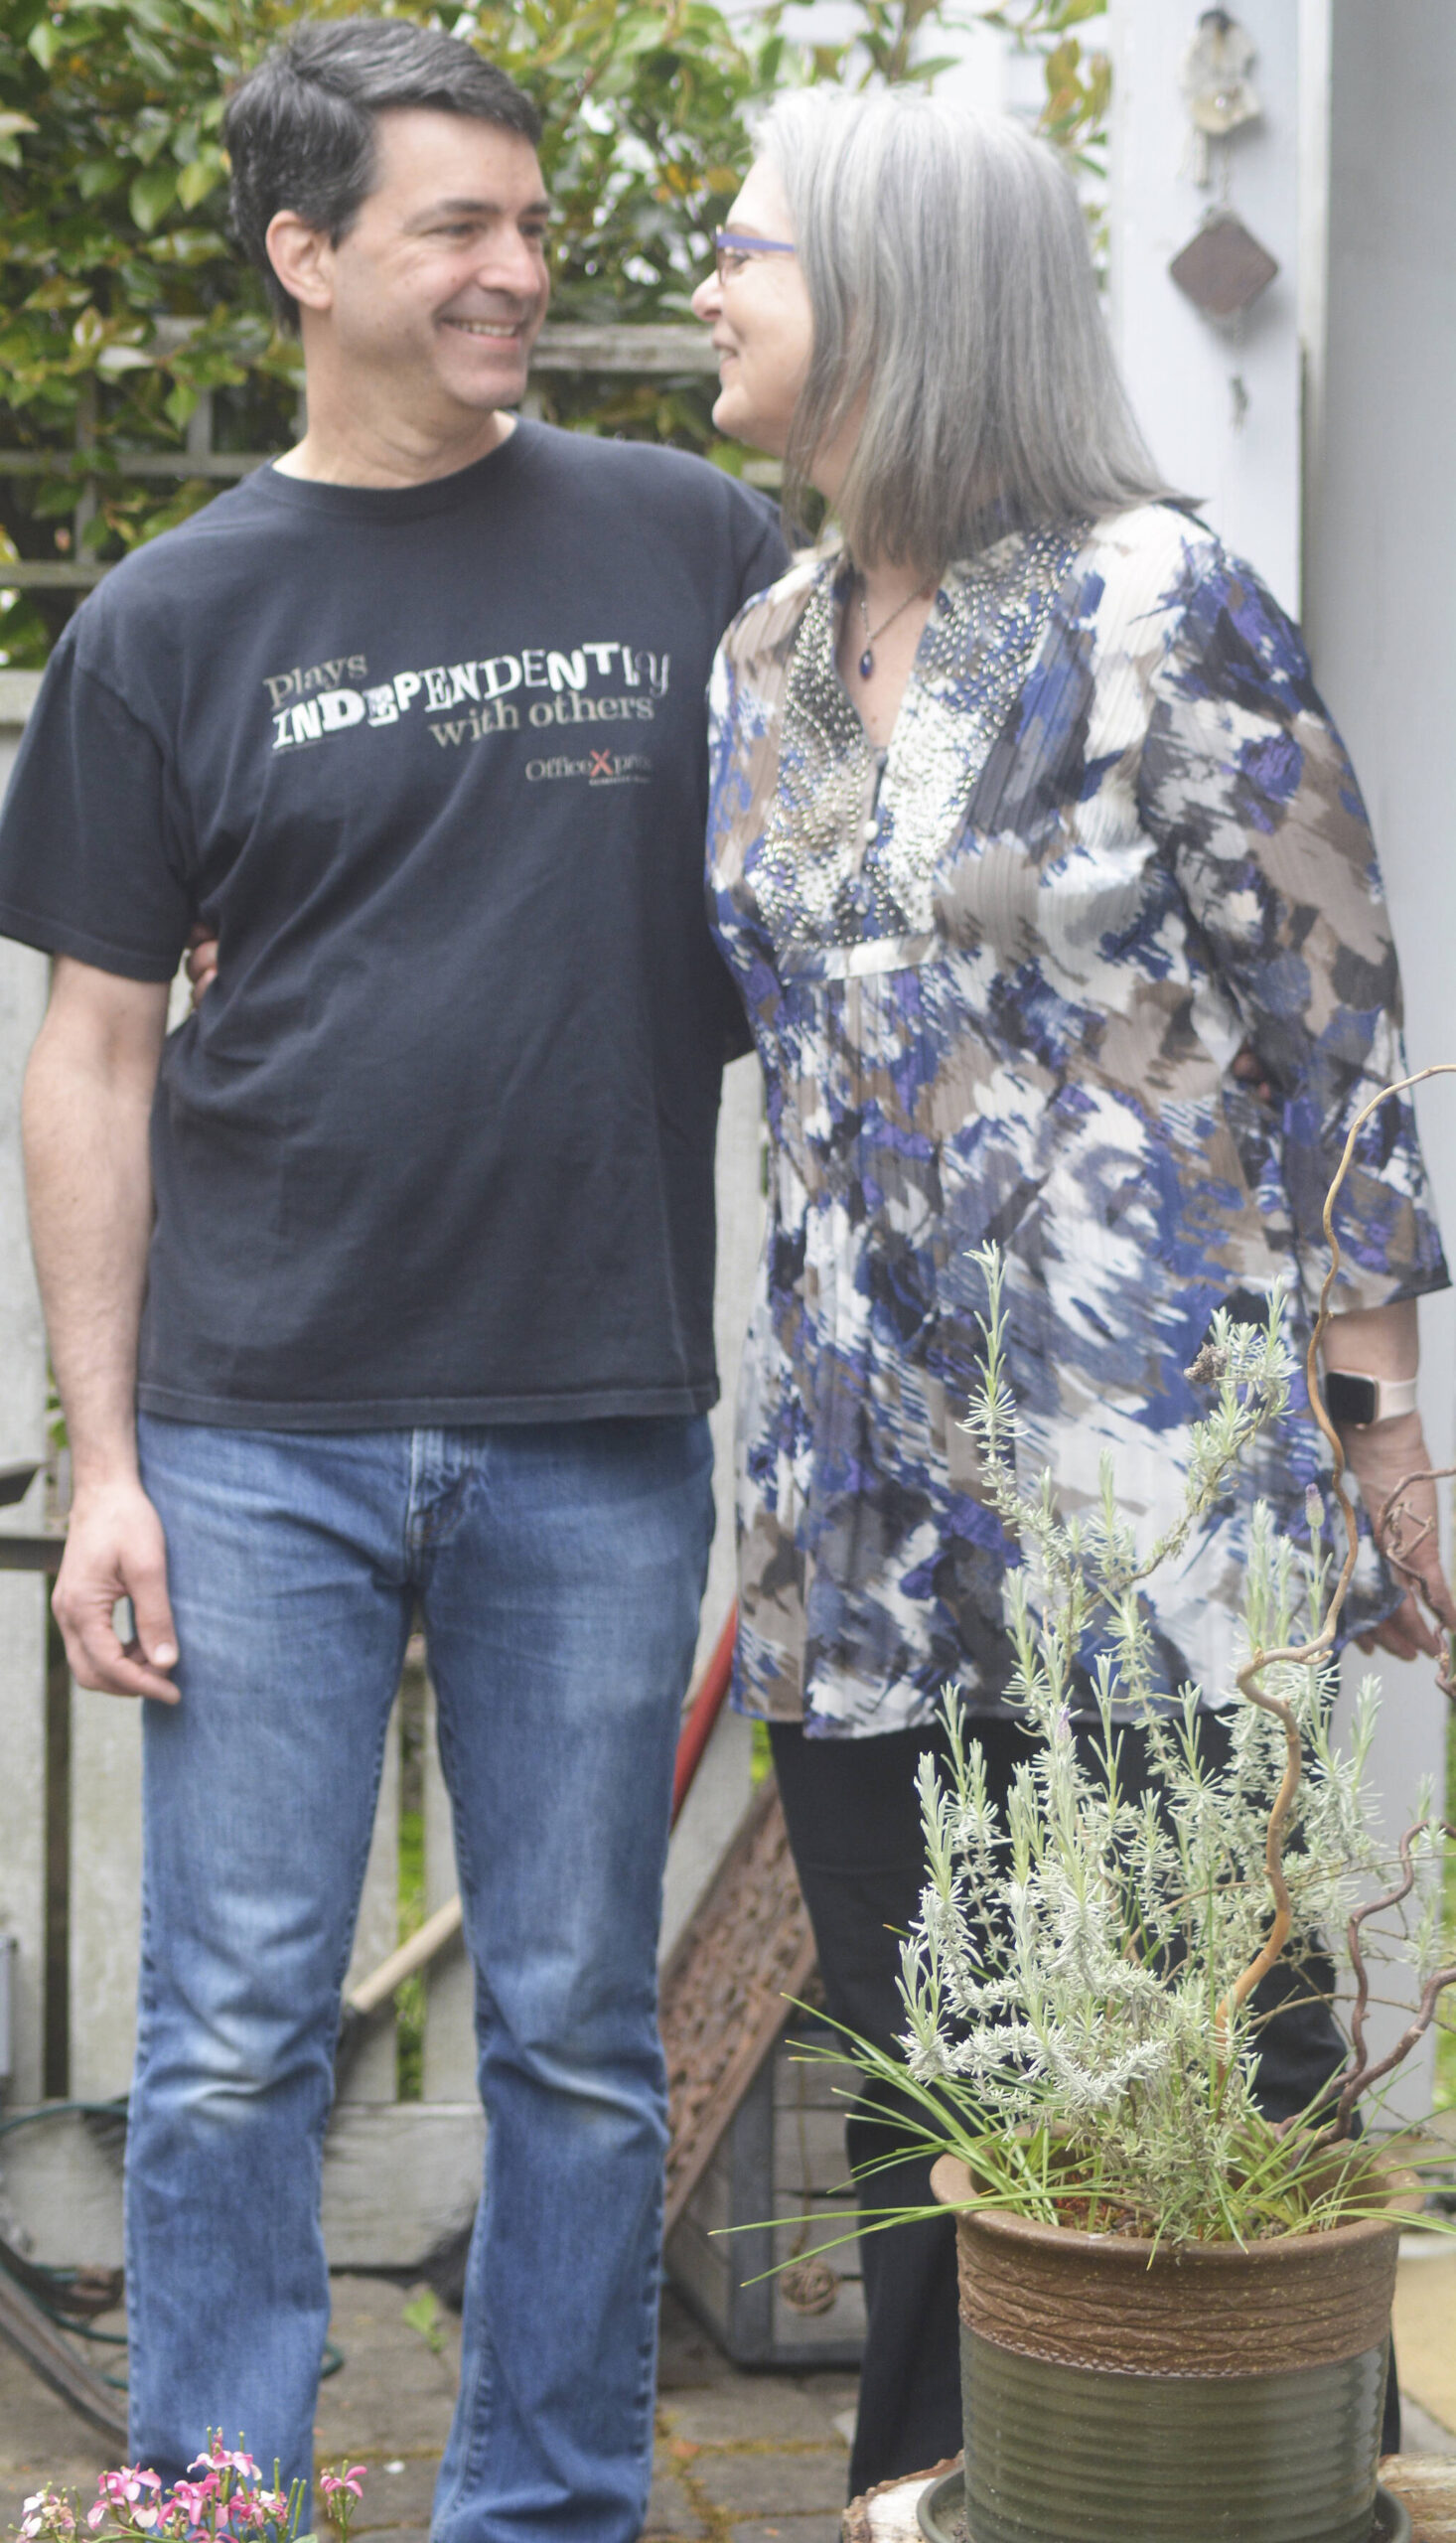 Leslie Schneider and partner Jason in their tiny backyard at the co-housing development.